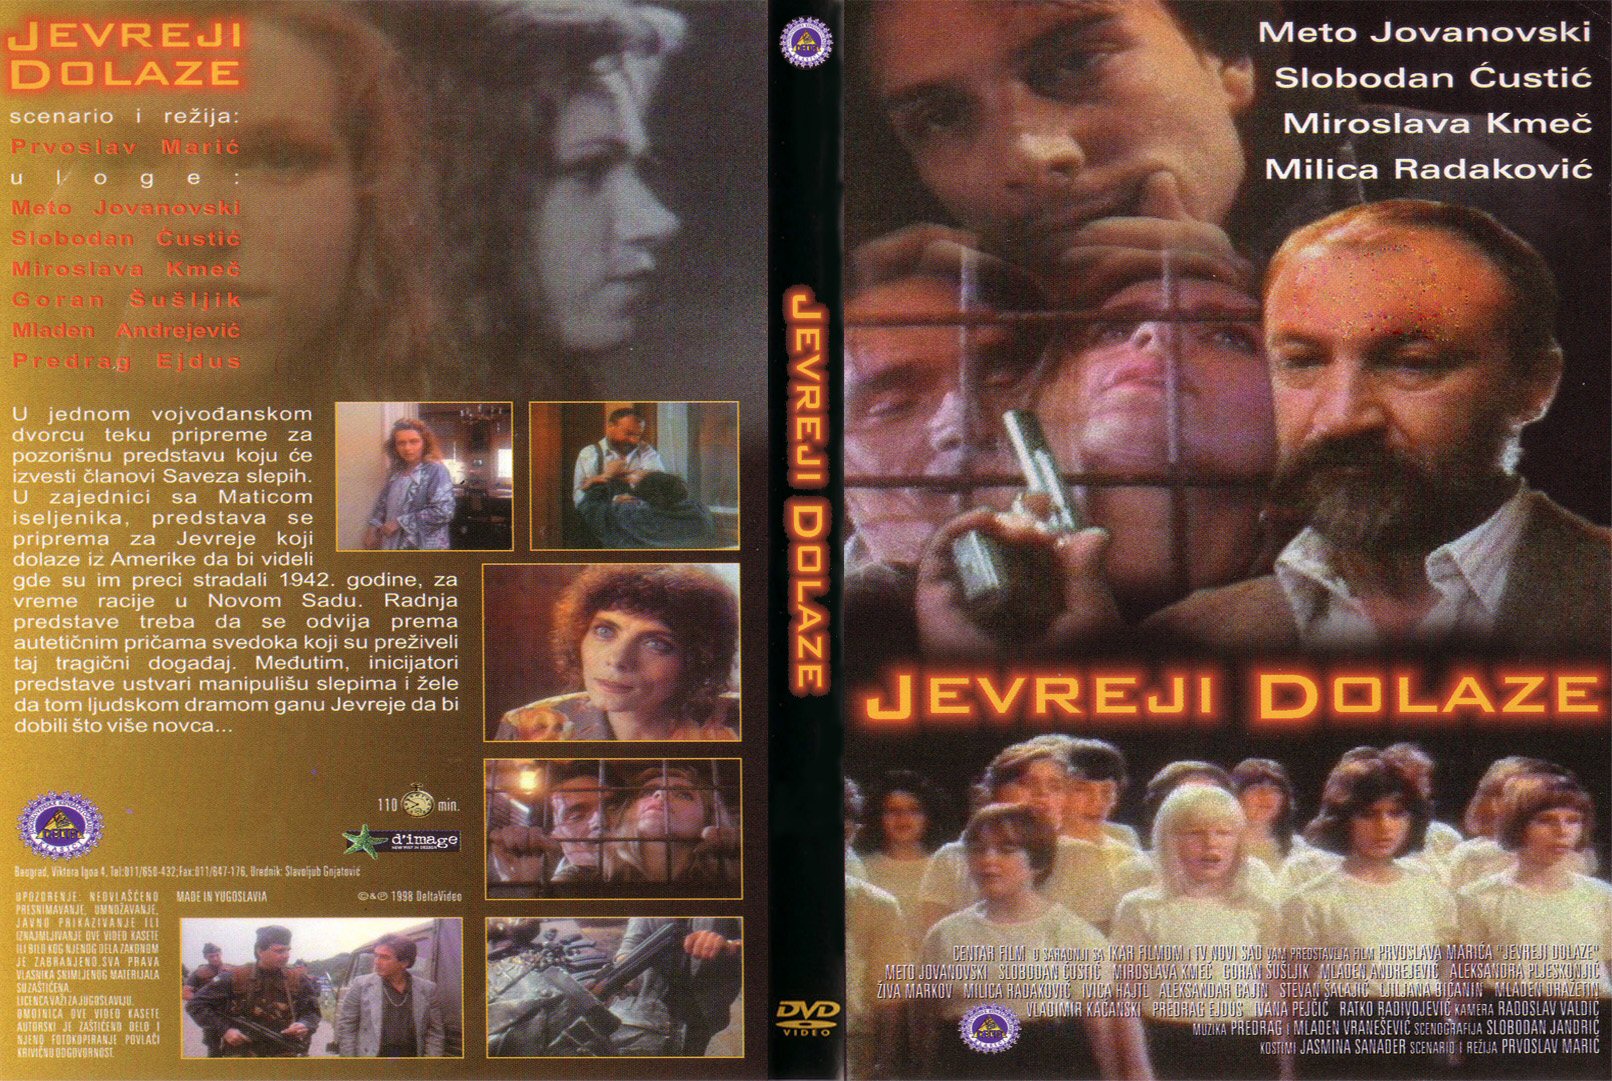 Click to view full size image -  DVD Cover - J - jevreji_dolaze_dvd - jevreji_dolaze_dvd.jpg